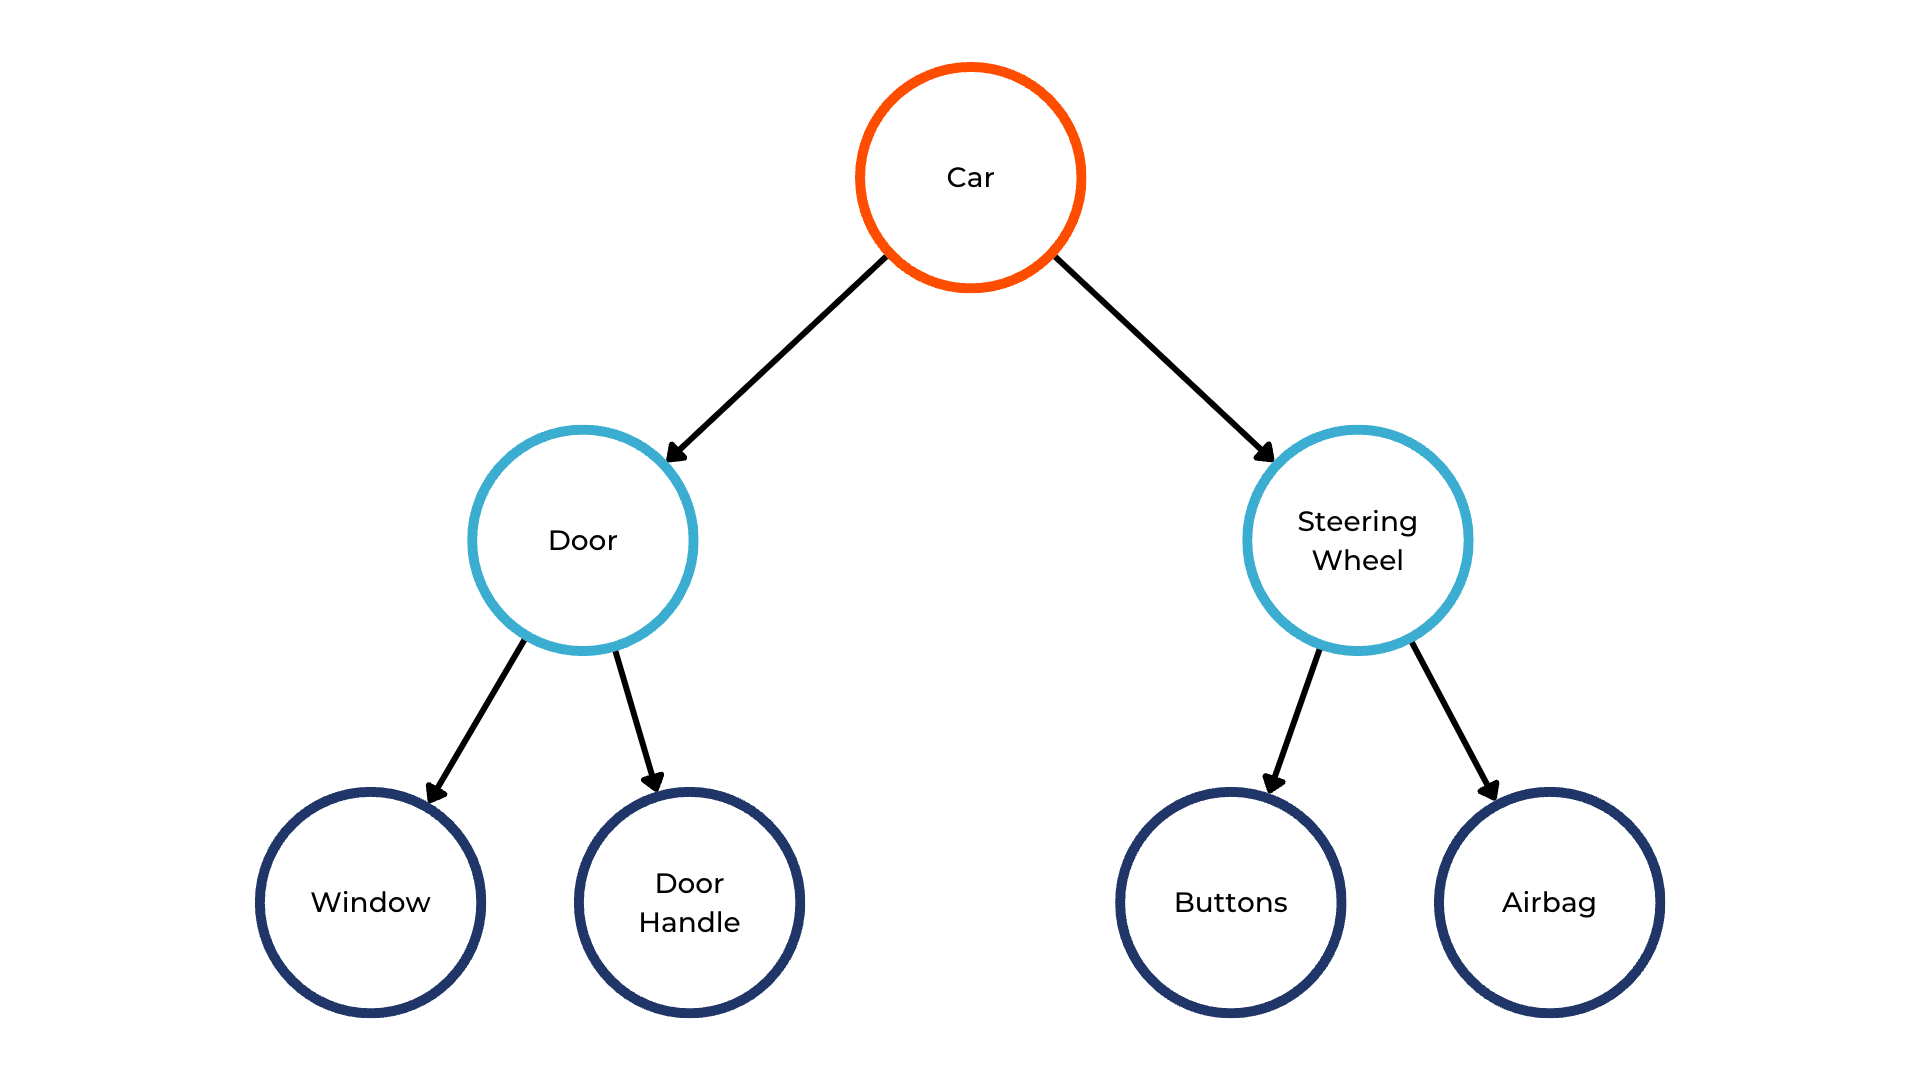 A visual depiction of a hierarchical data structure containing a car node connected to car parts.